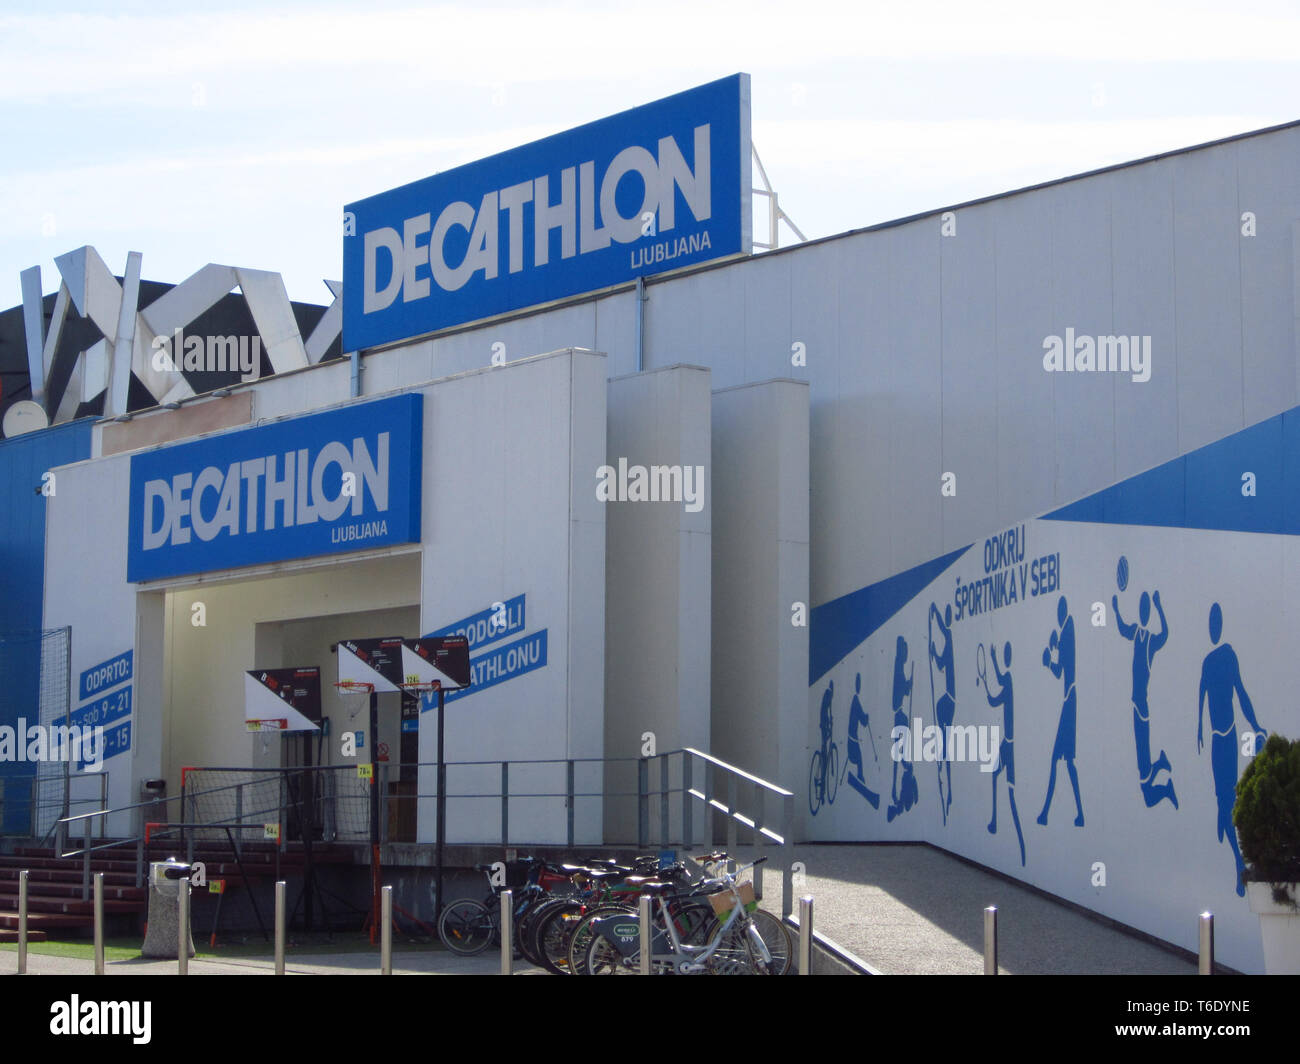 LJUBLJANA, SLOVENIA - MARCH 22 2019: Decathlon sign on a wall. Decathlon is a french company and one of the world's largest sporting goods retailers Stock Photo